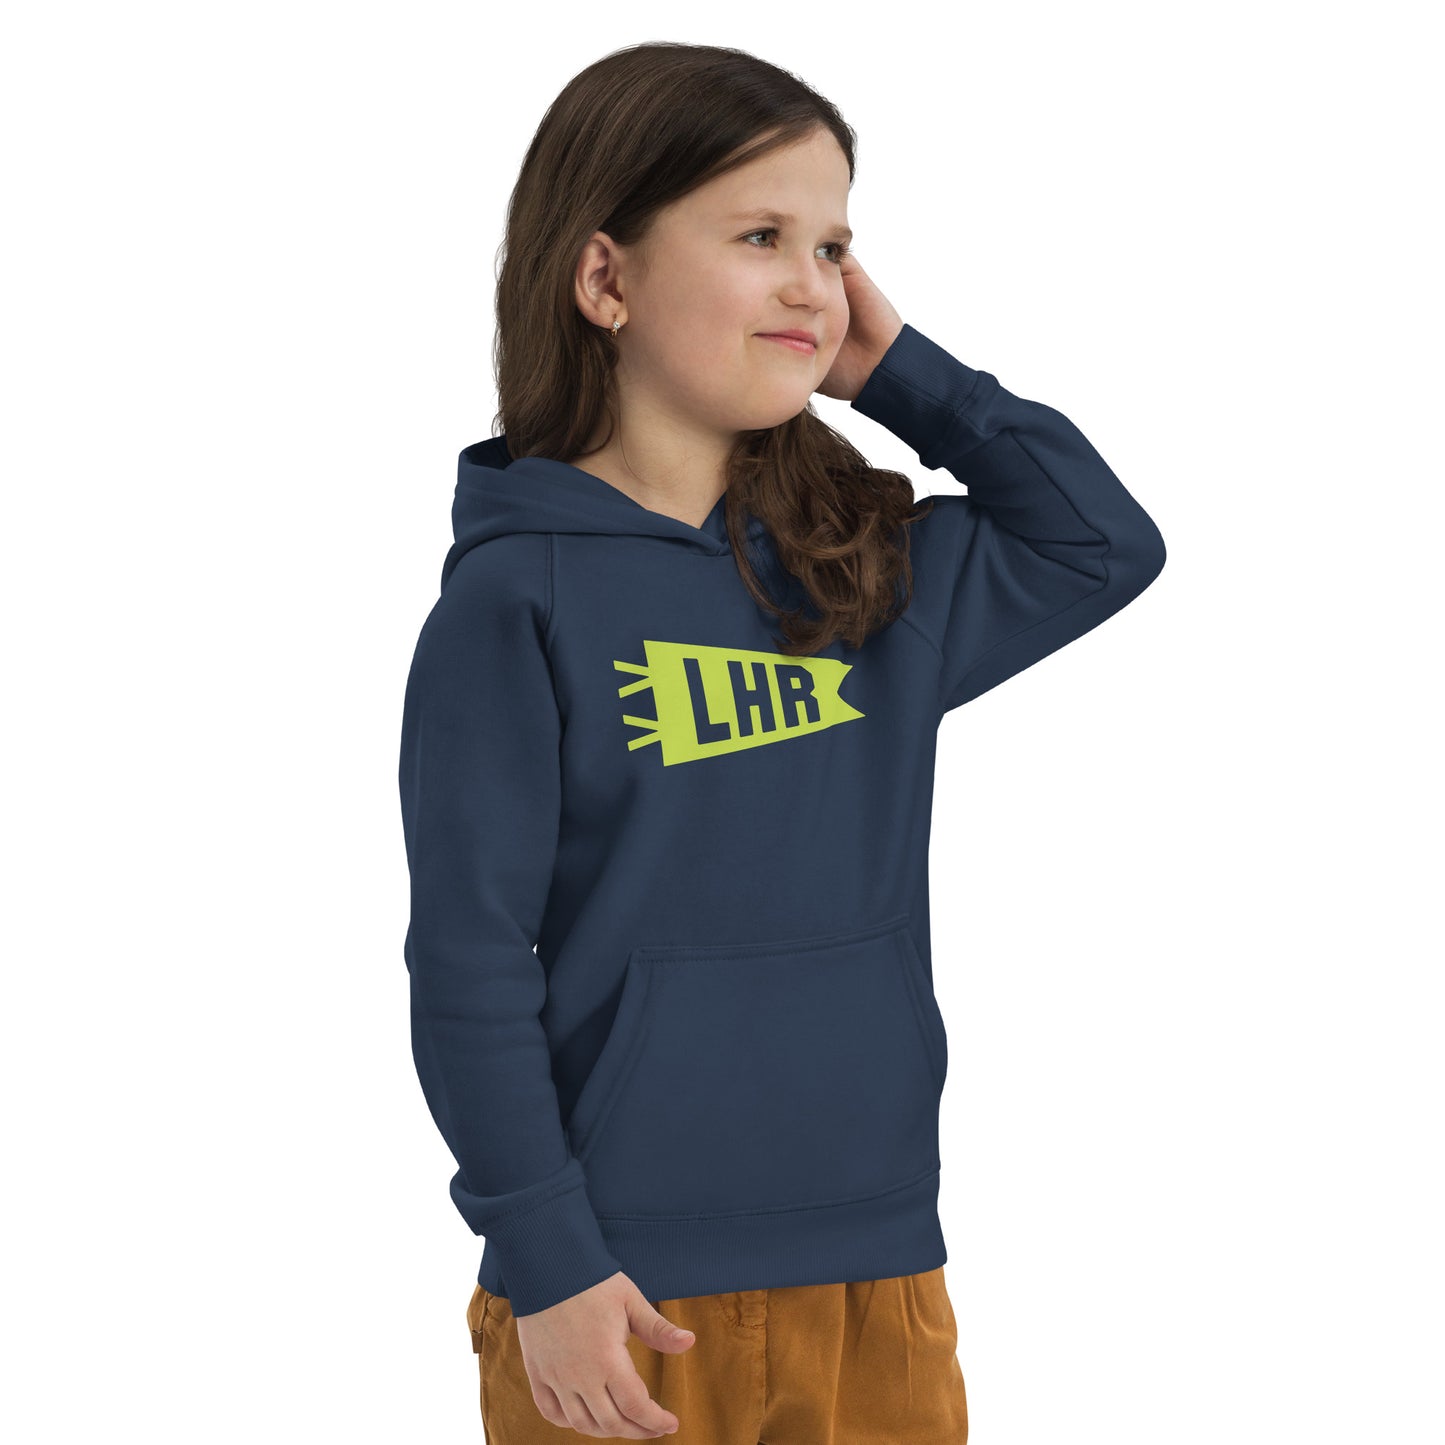 Kid's Sustainable Hoodie - Green Graphic • LHR London • YHM Designs - Image 06